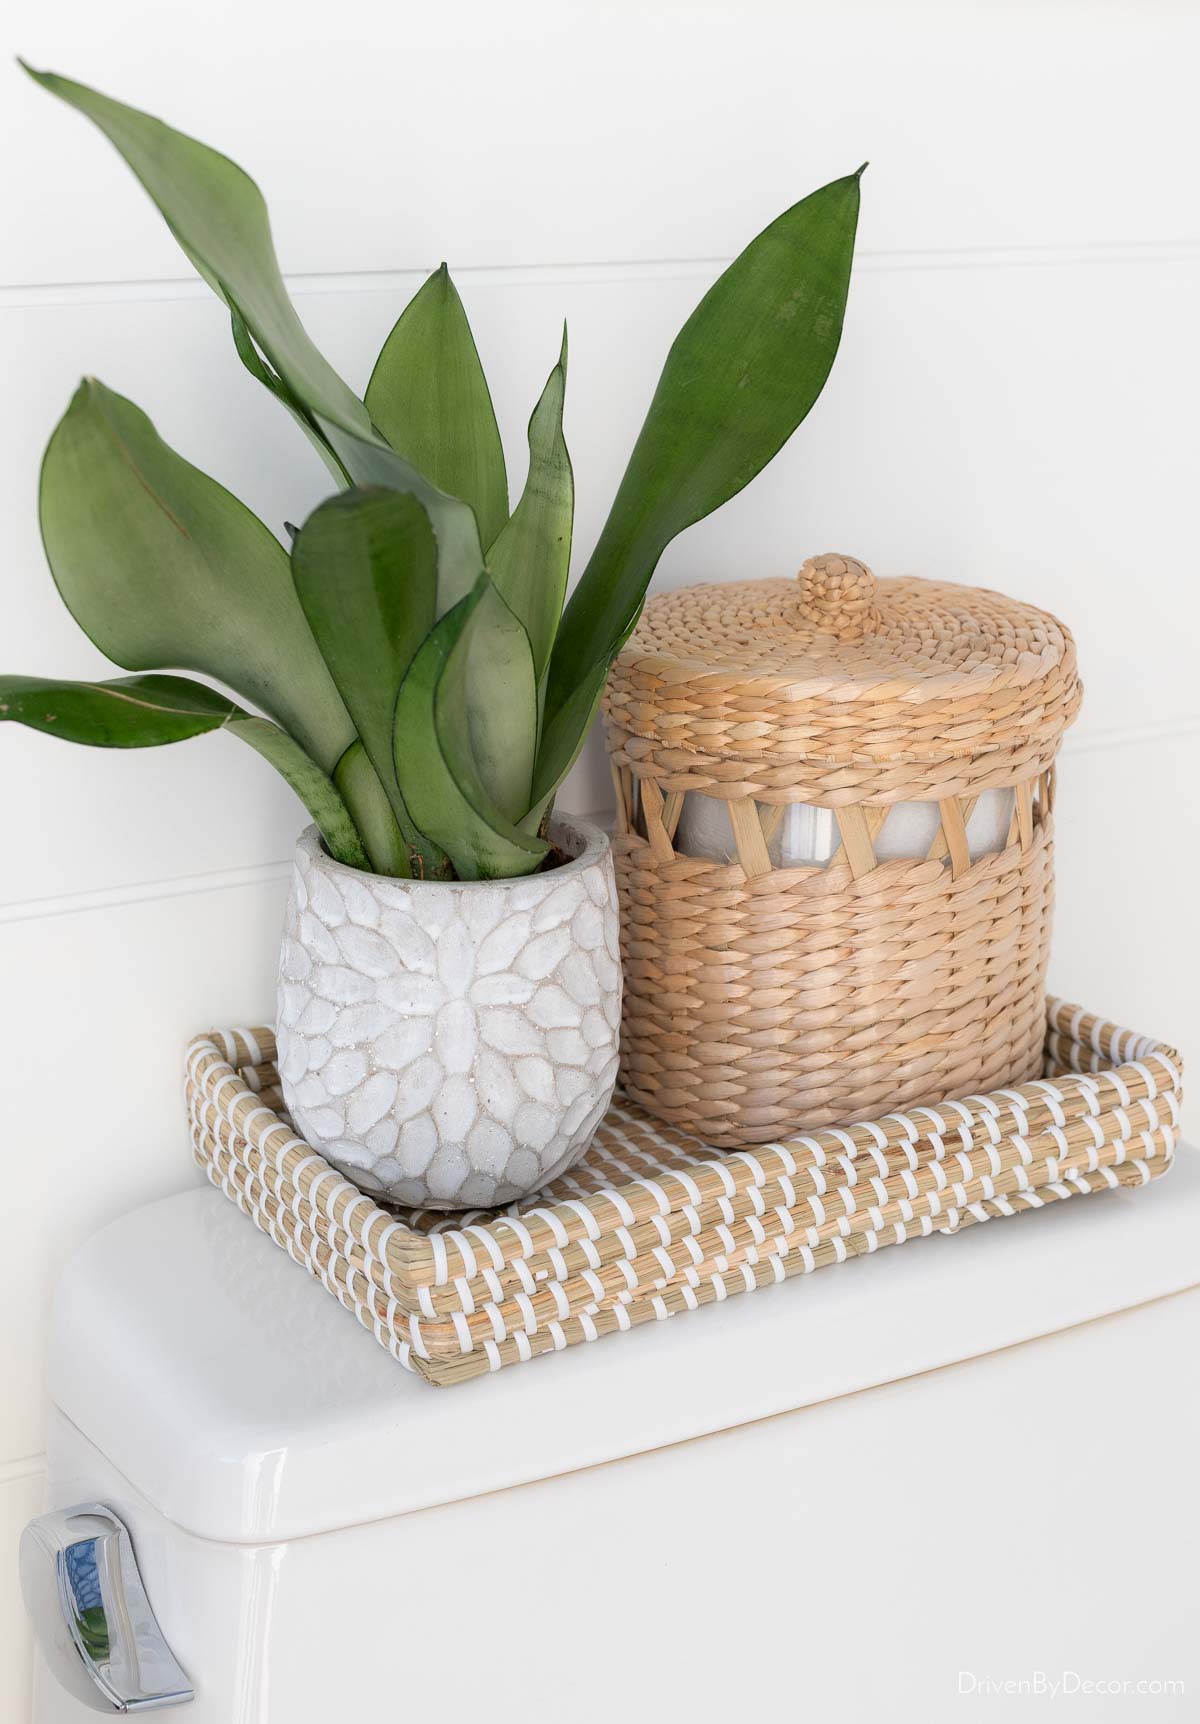 Woven toilet tray with plant and holder on top of toilet